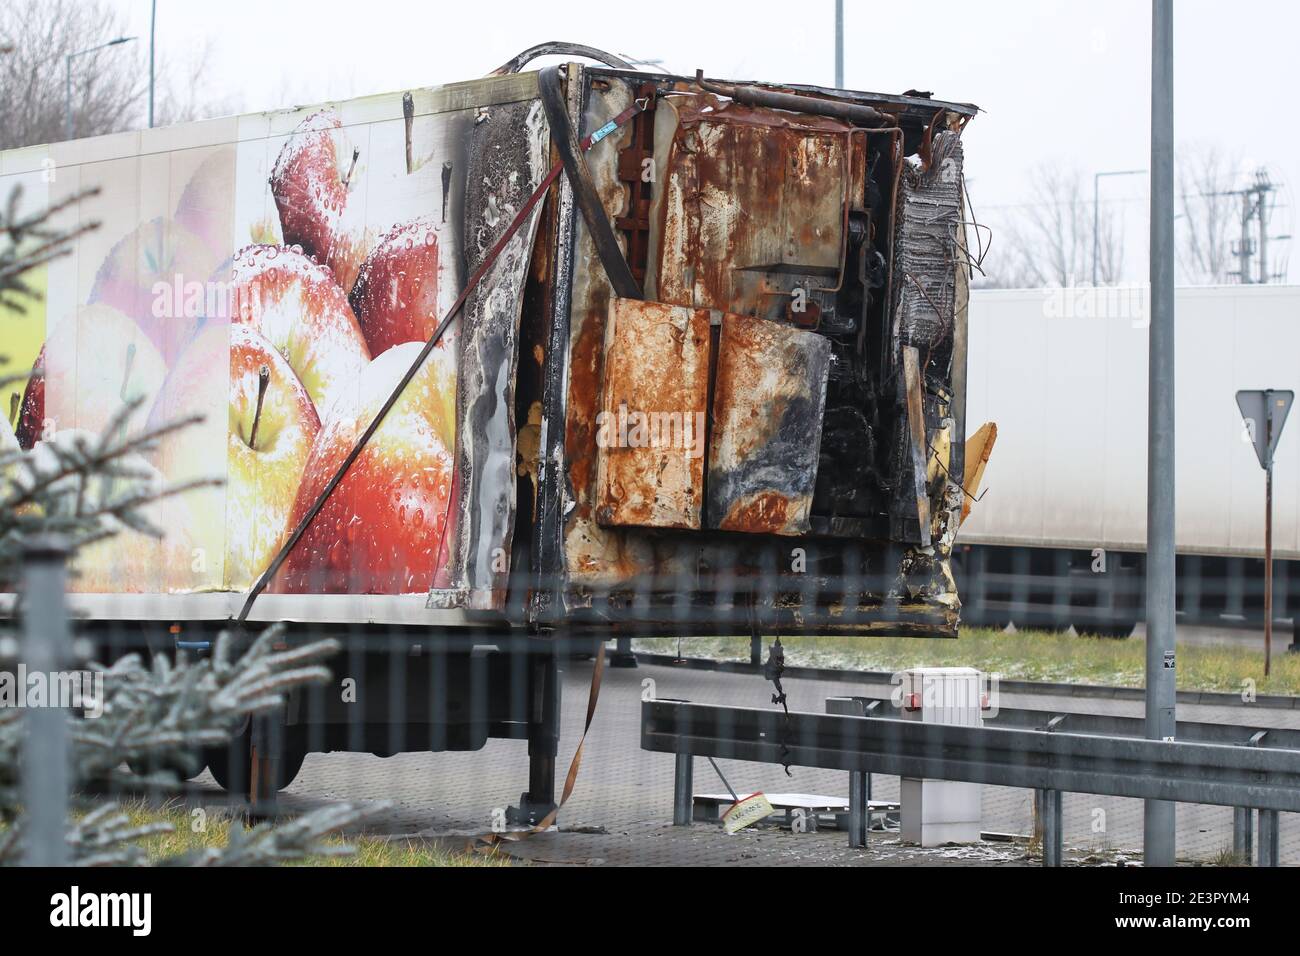 Refrigerated trailer burnt by cooling unit fire Stock Photo